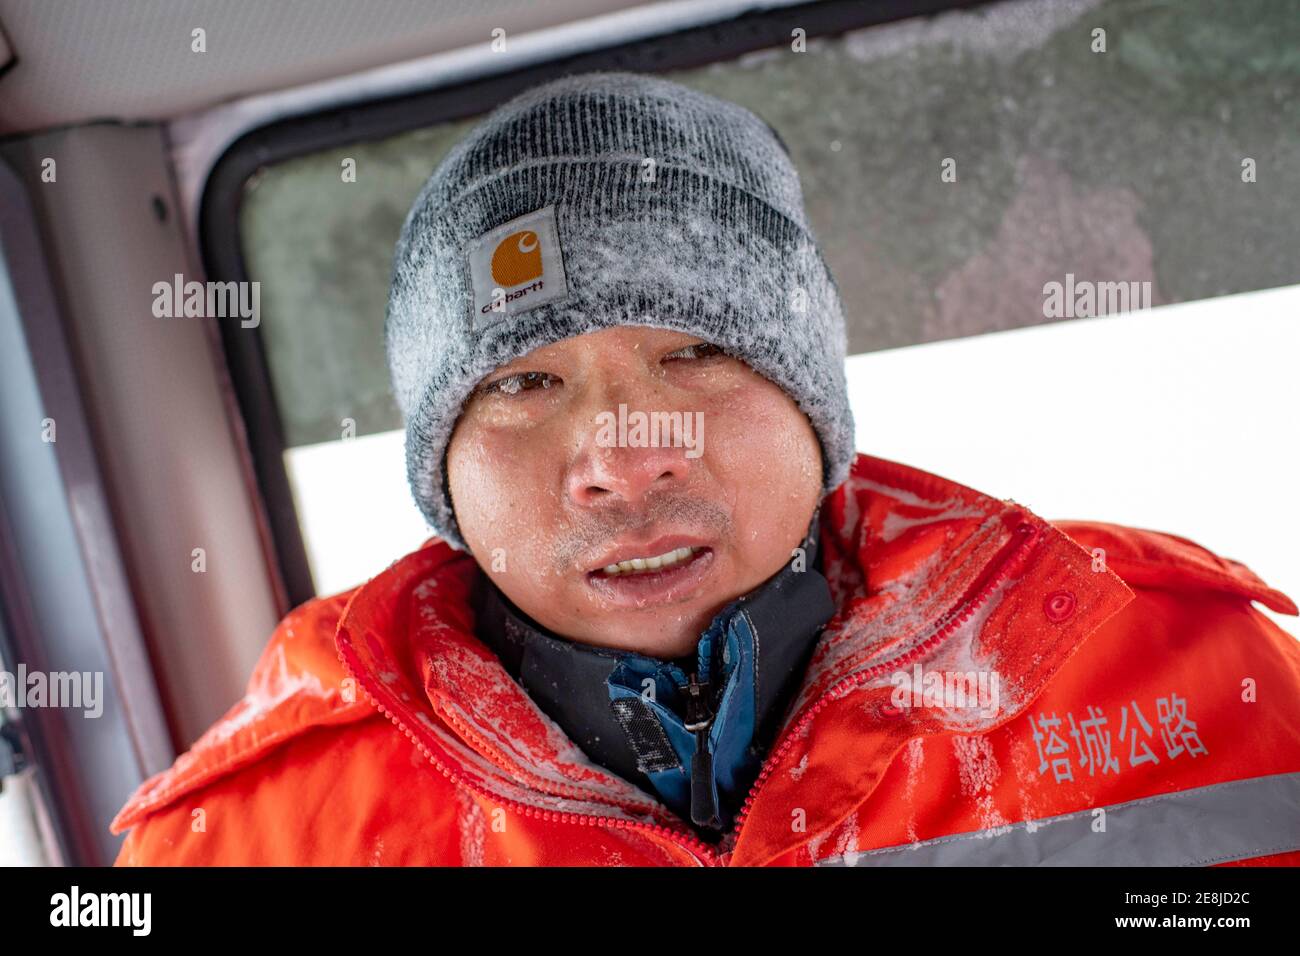 (210131) -- URUMQI, Jan. 31, 2021 (Xinhua) -- A staff member of the Maytas wind prevention and rescuing base returns to the driver's cab to keep warm after searching for stranded passengers in Maytas, Emin County of northwest China's Xinjiang Uygur Autonomous Region, Jan. 23, 2021. Maytas, located in Emin County, is an important thoroughfare with tough weather conditions of snowstorms and heavy wind for about half a year.   Since 2002, the Maytas wind prevention and rescuing base has been responsible for road clearing and rescuing of the S201 in the region. For people who are on duty here, wor Stock Photo